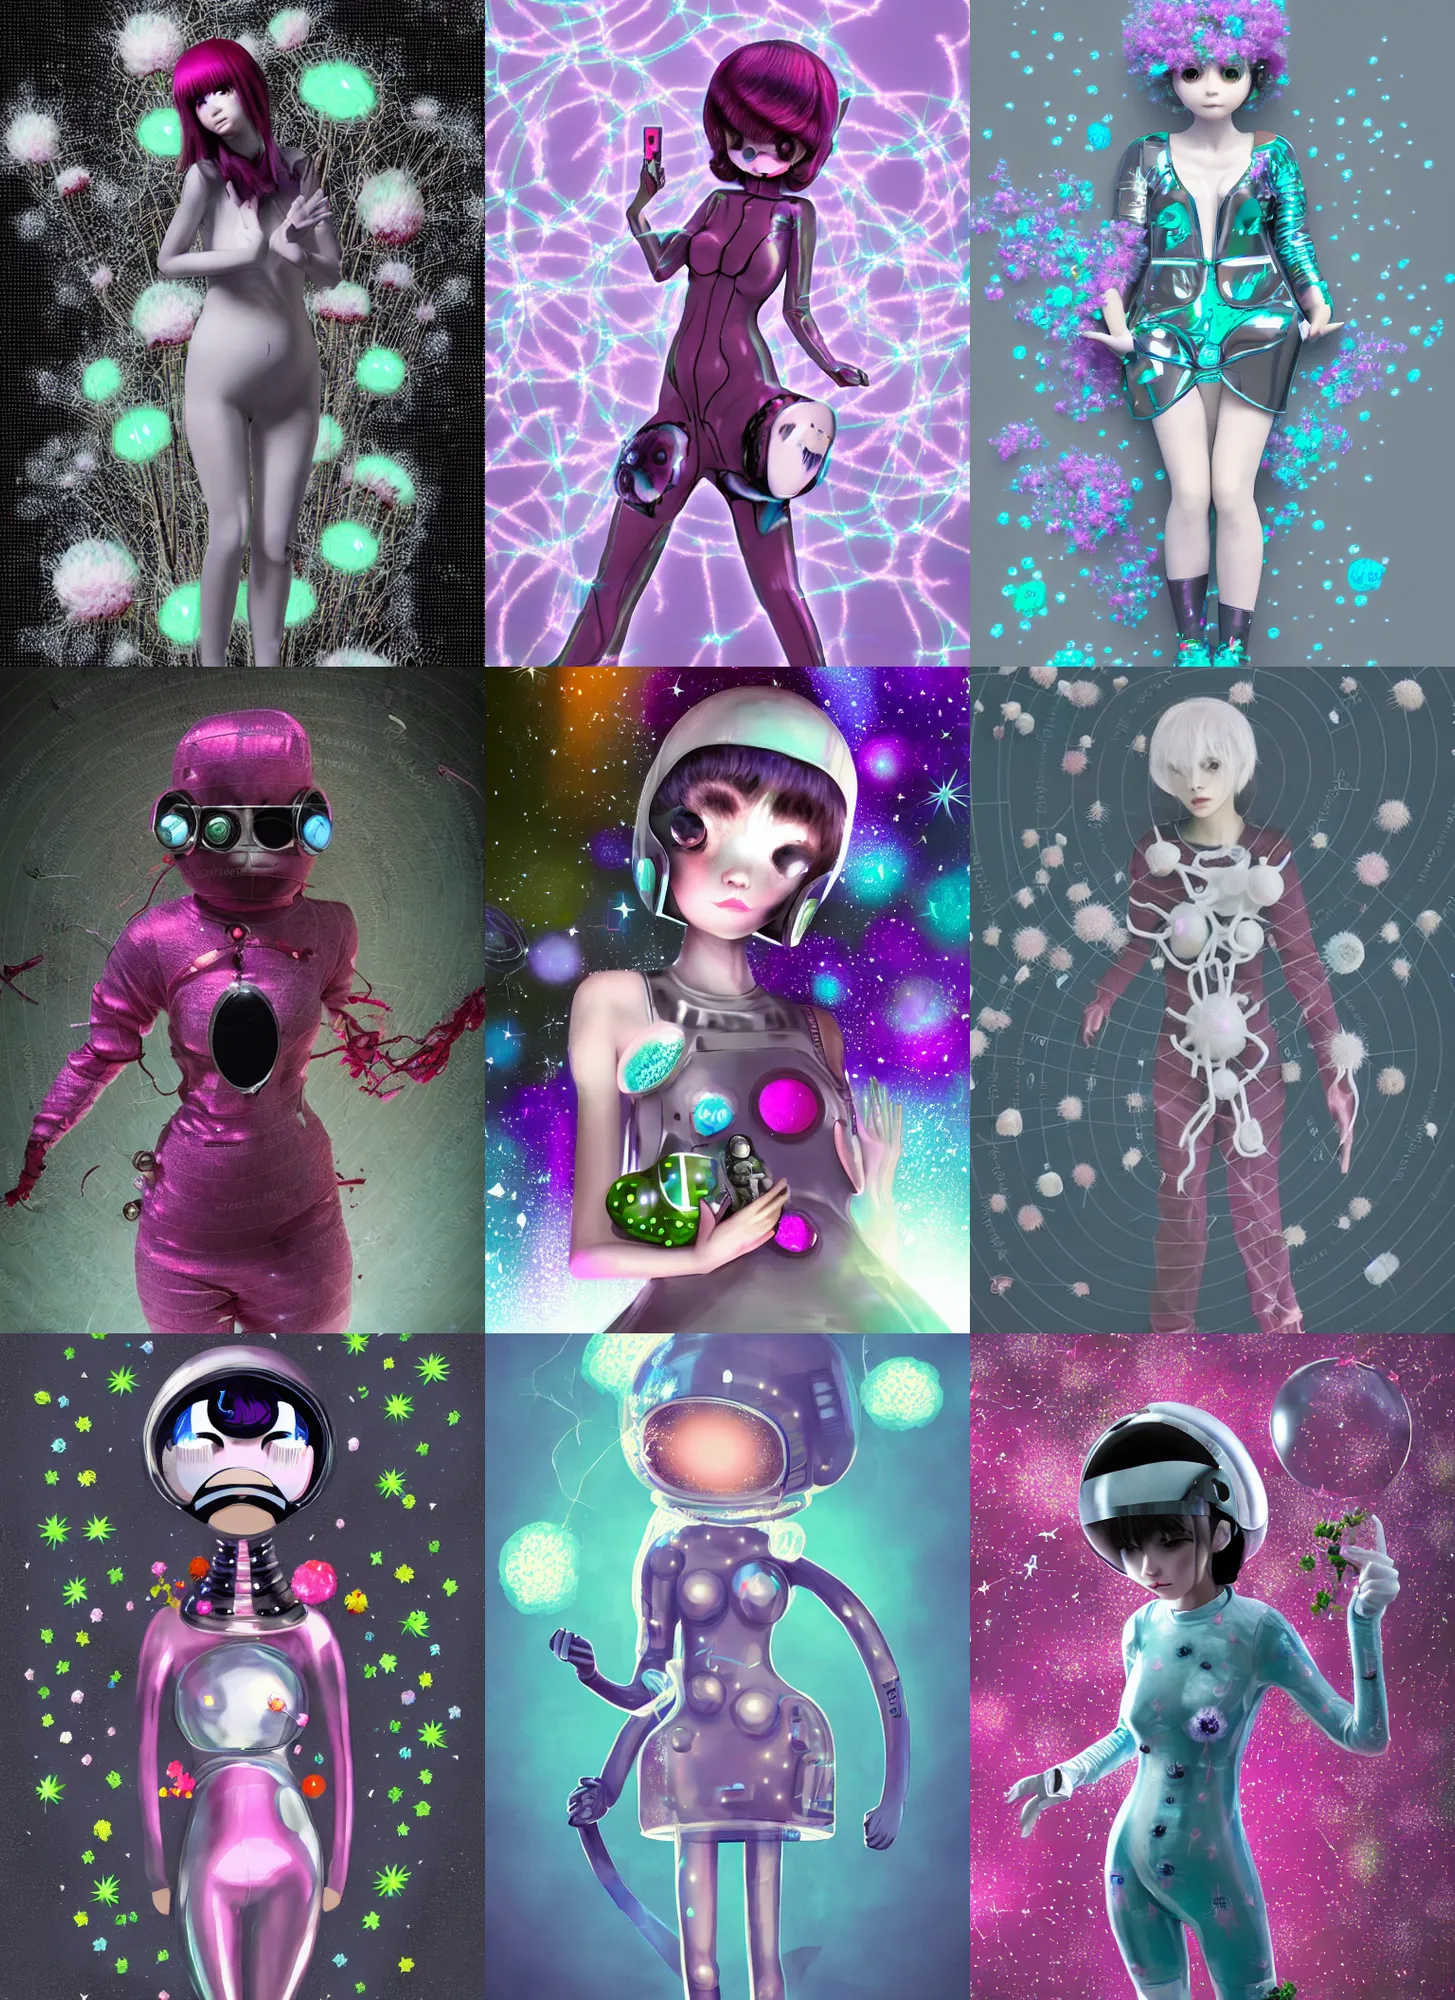 Prompt: hyper render - kawaii portrait ( space suit, chrome, porcelain, forcefield, ramona flowers ) fetal fisted for revolution in network berry and suit holds gossamer polyp fungal flowers, dress, ryden, odilon, borg